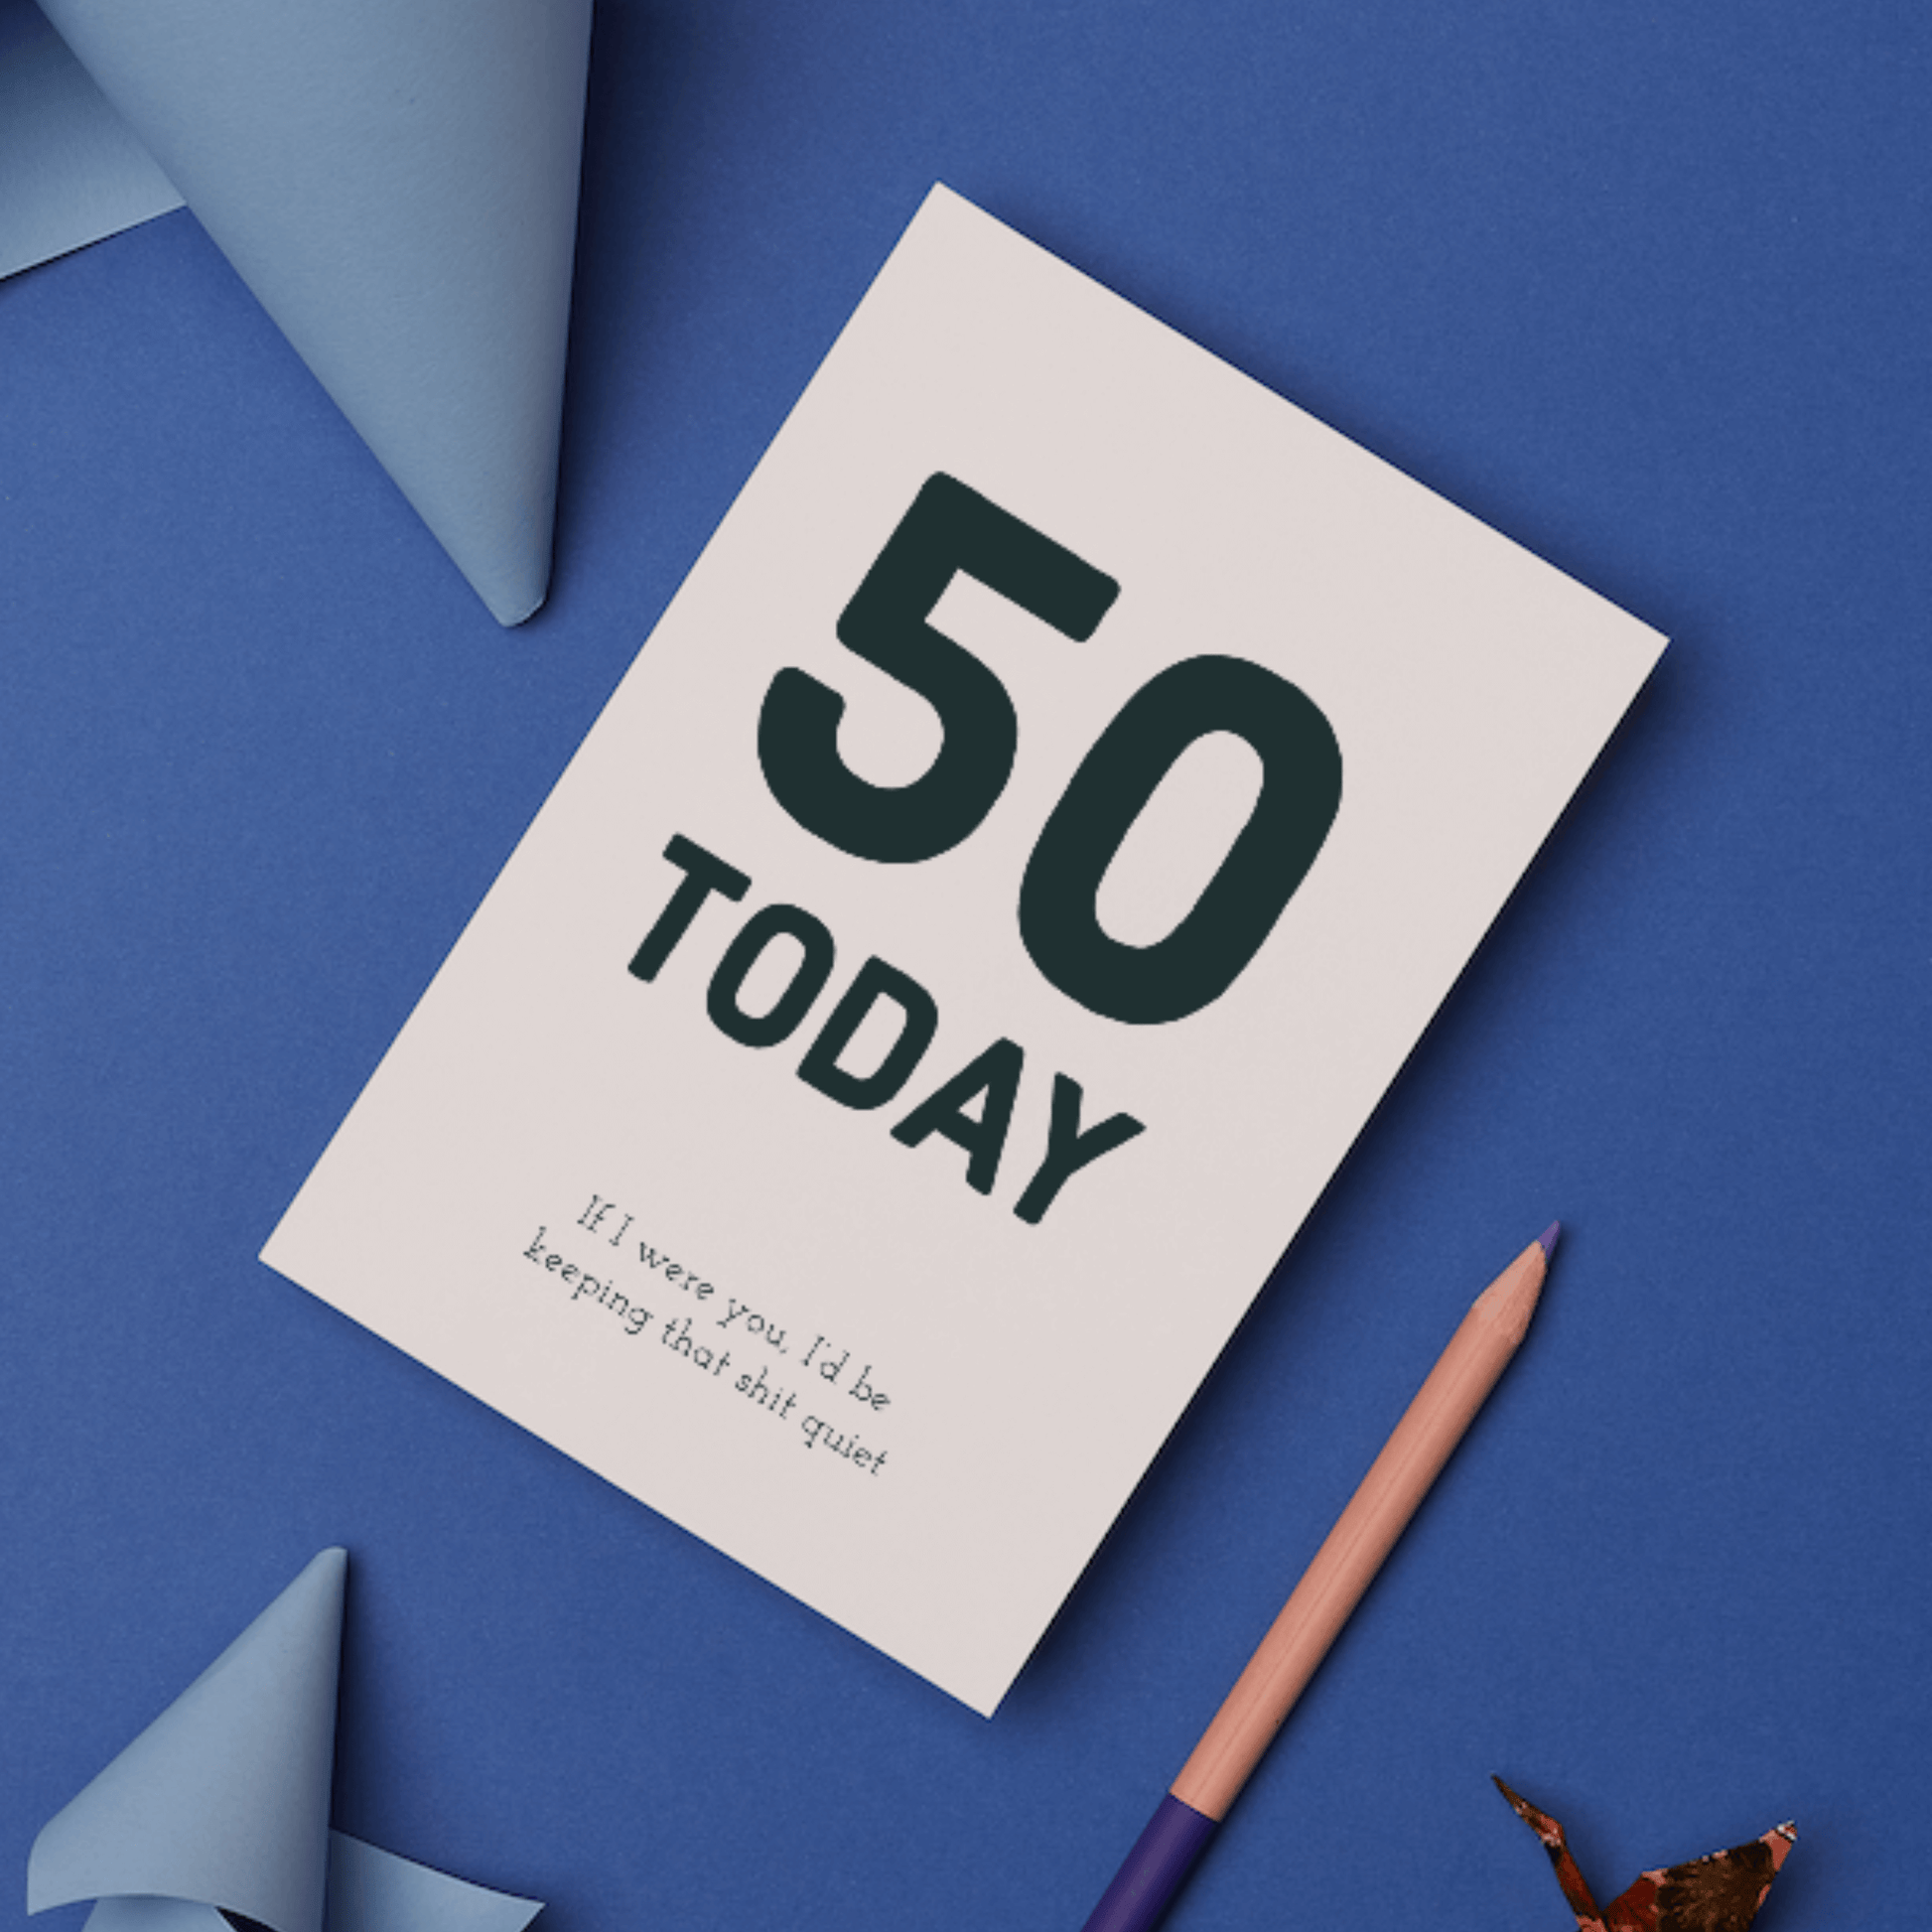 Little Kraken's 50 Today, Keep That Shit Quiet, Birthday Cards for £3.50 each